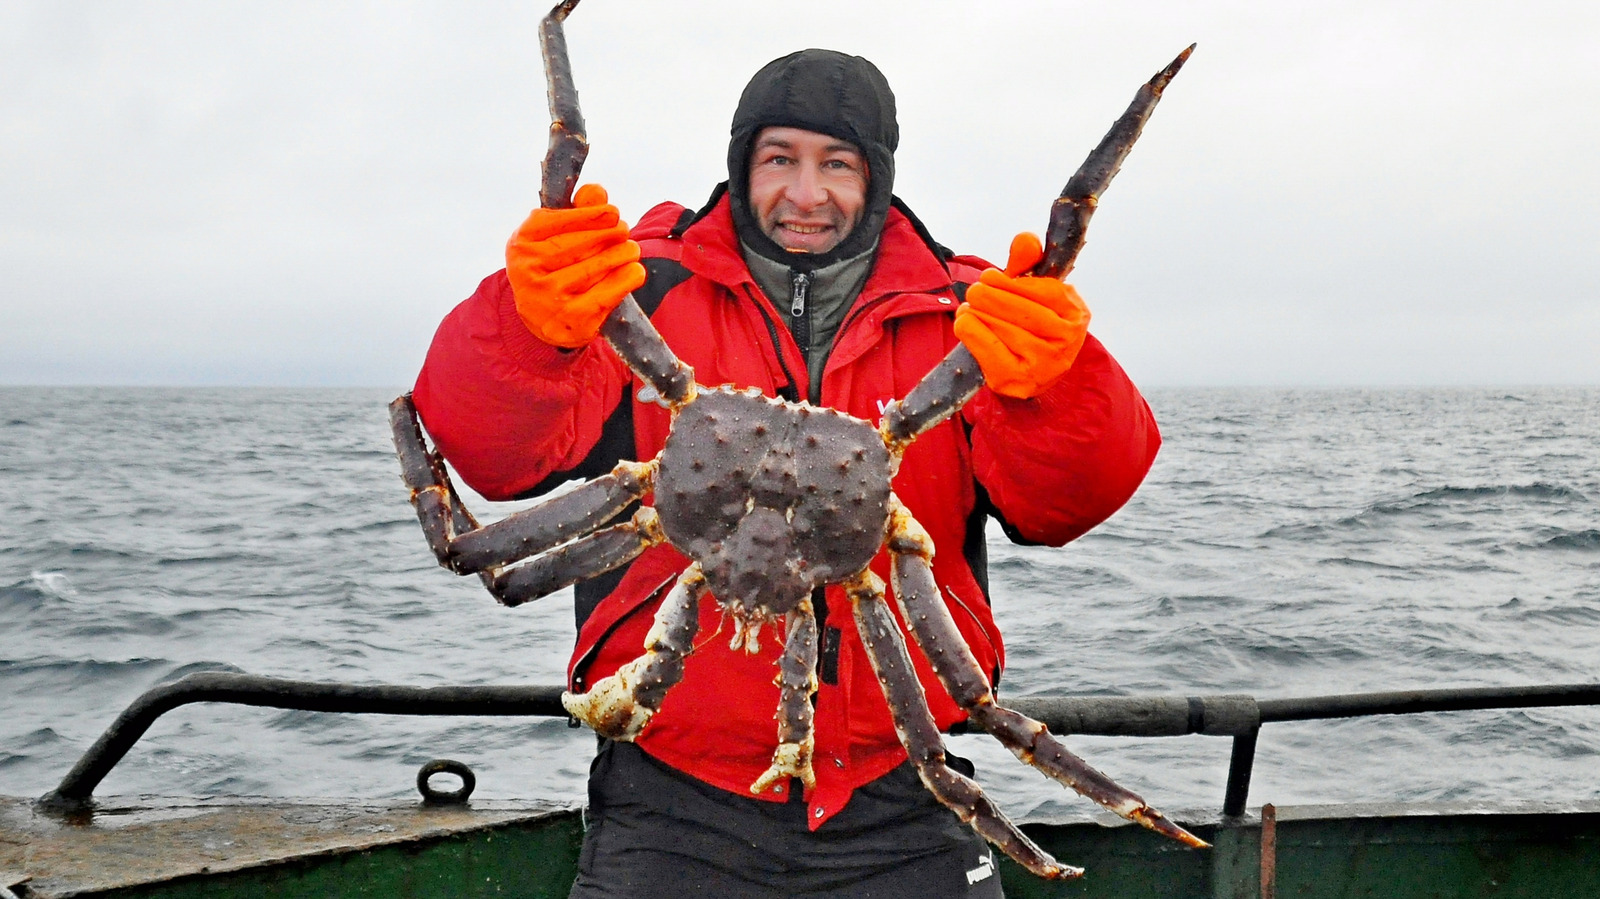 What's The Difference Between Snow Crab And King Crab?